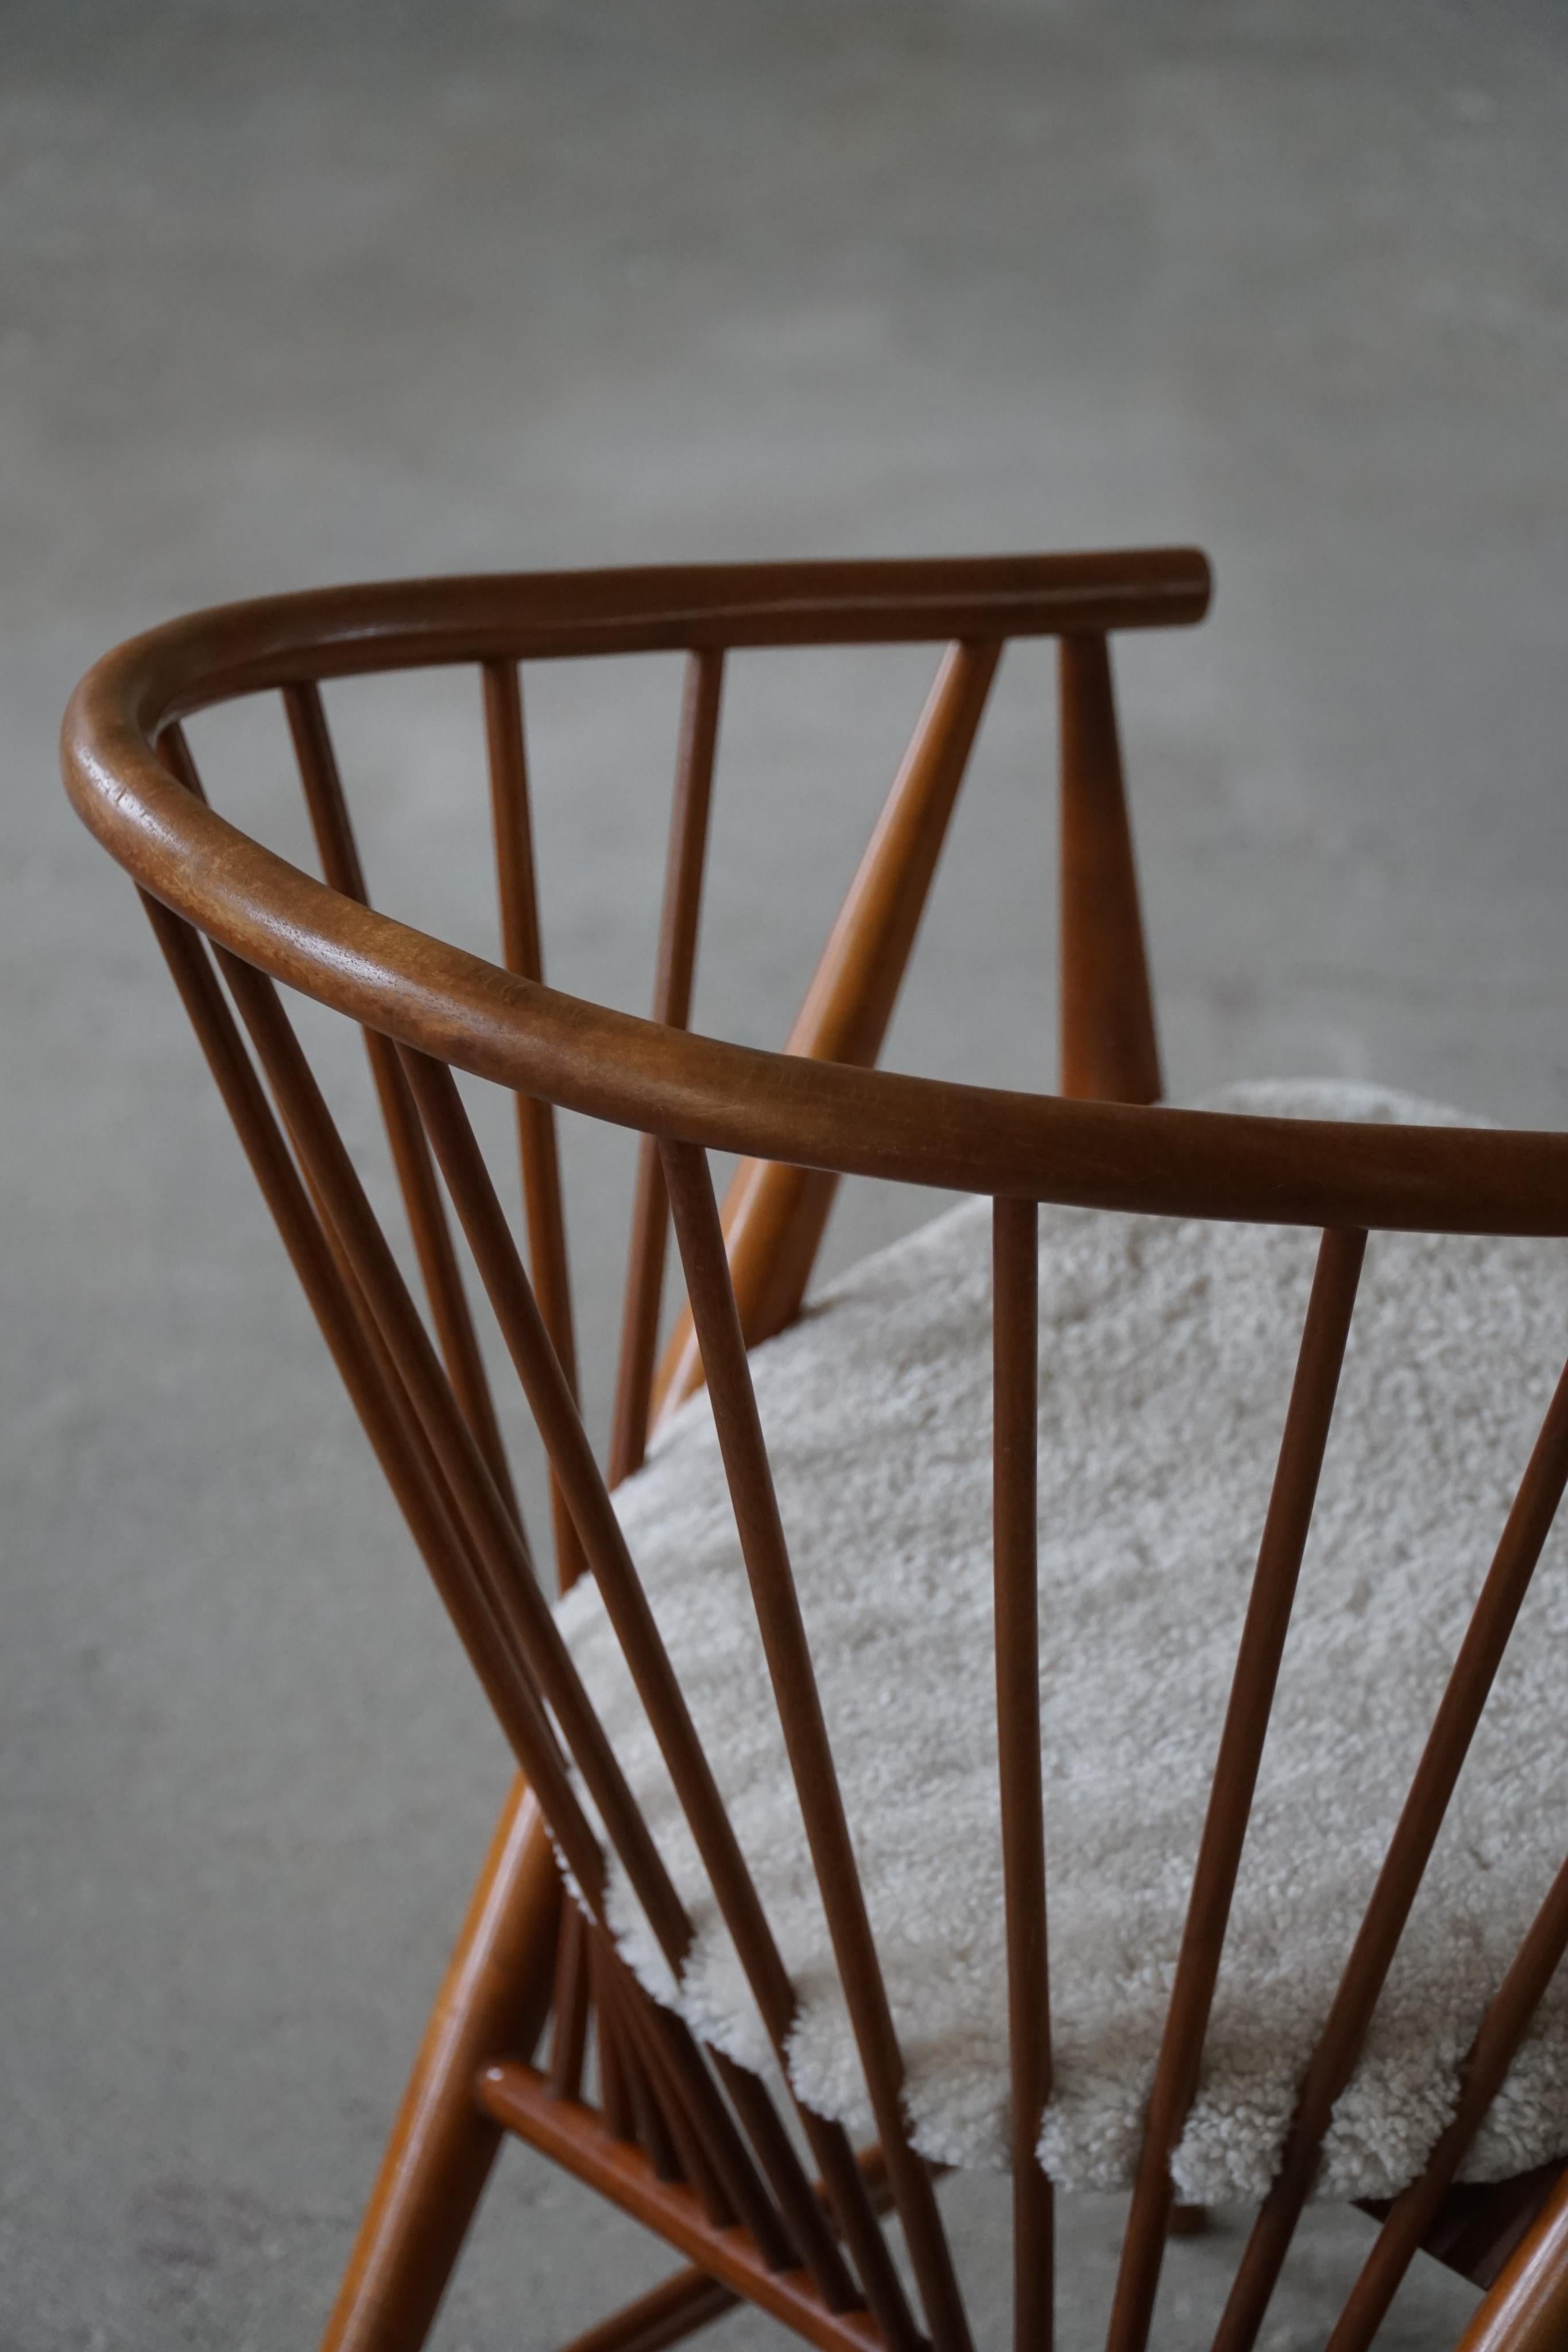 Sonna Rosén Arm Chair in Beech & Reupholstered in Lambswool, Model 